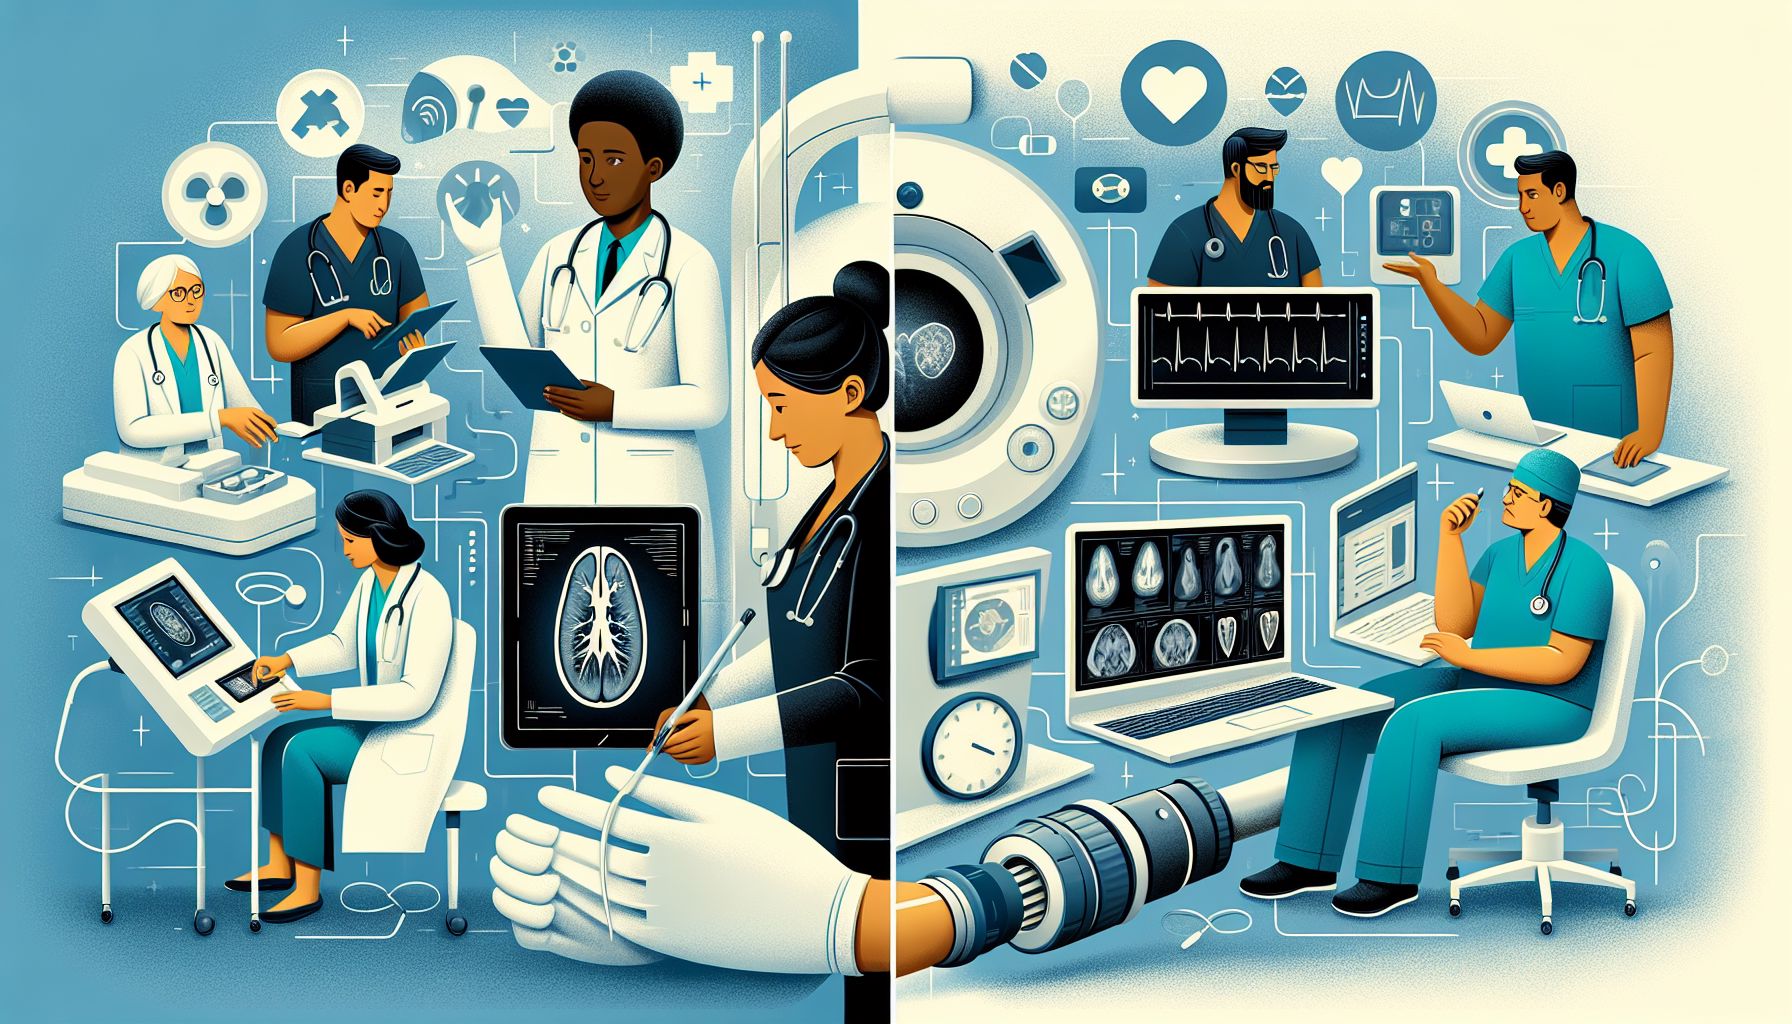 The Advantages and Challenges of Medical Technology